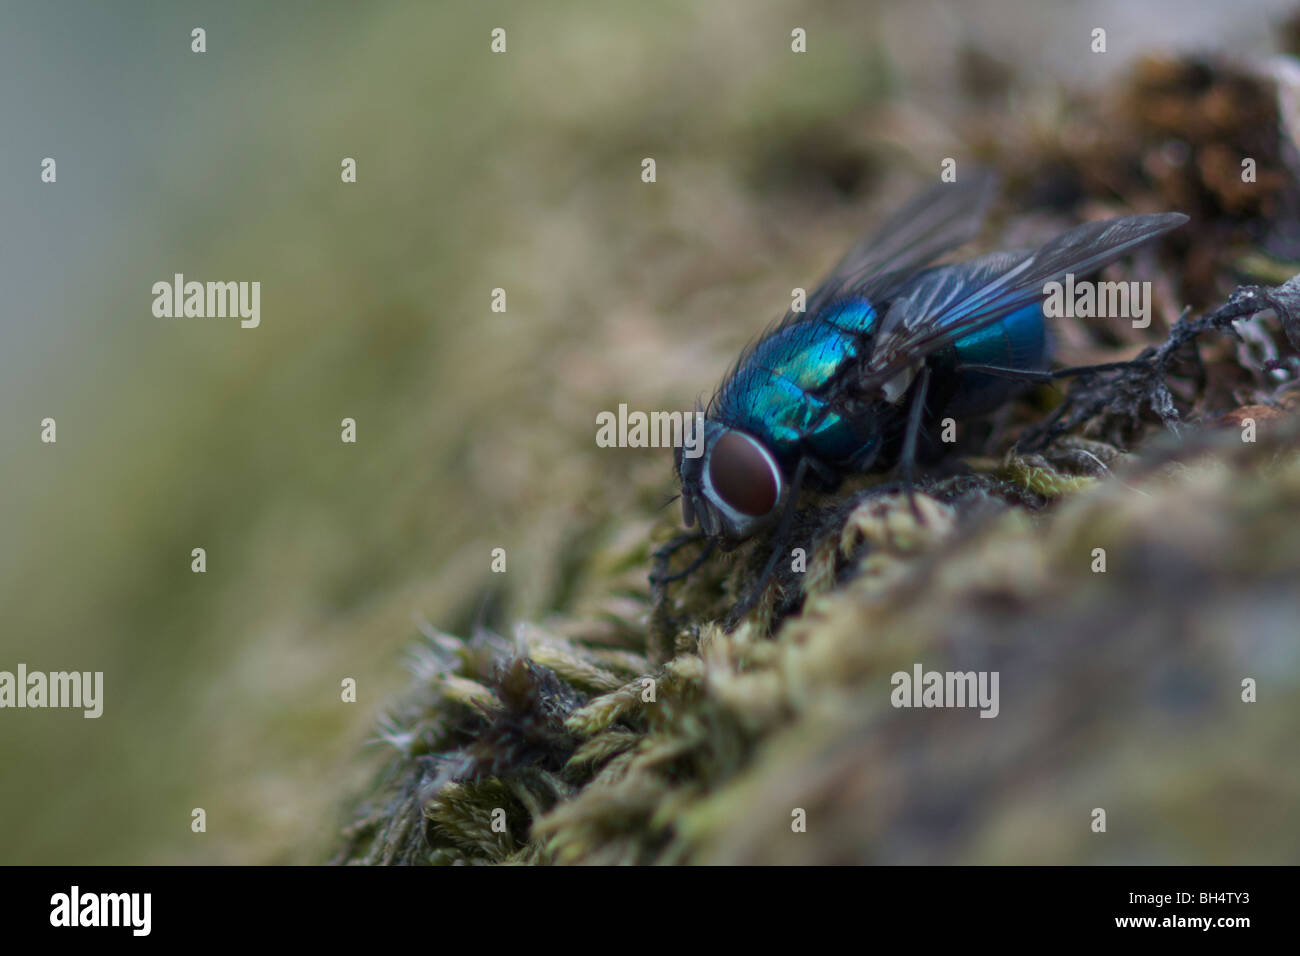 Close-up of green bottle fly (Lucilia caesar) on moss. Stock Photo